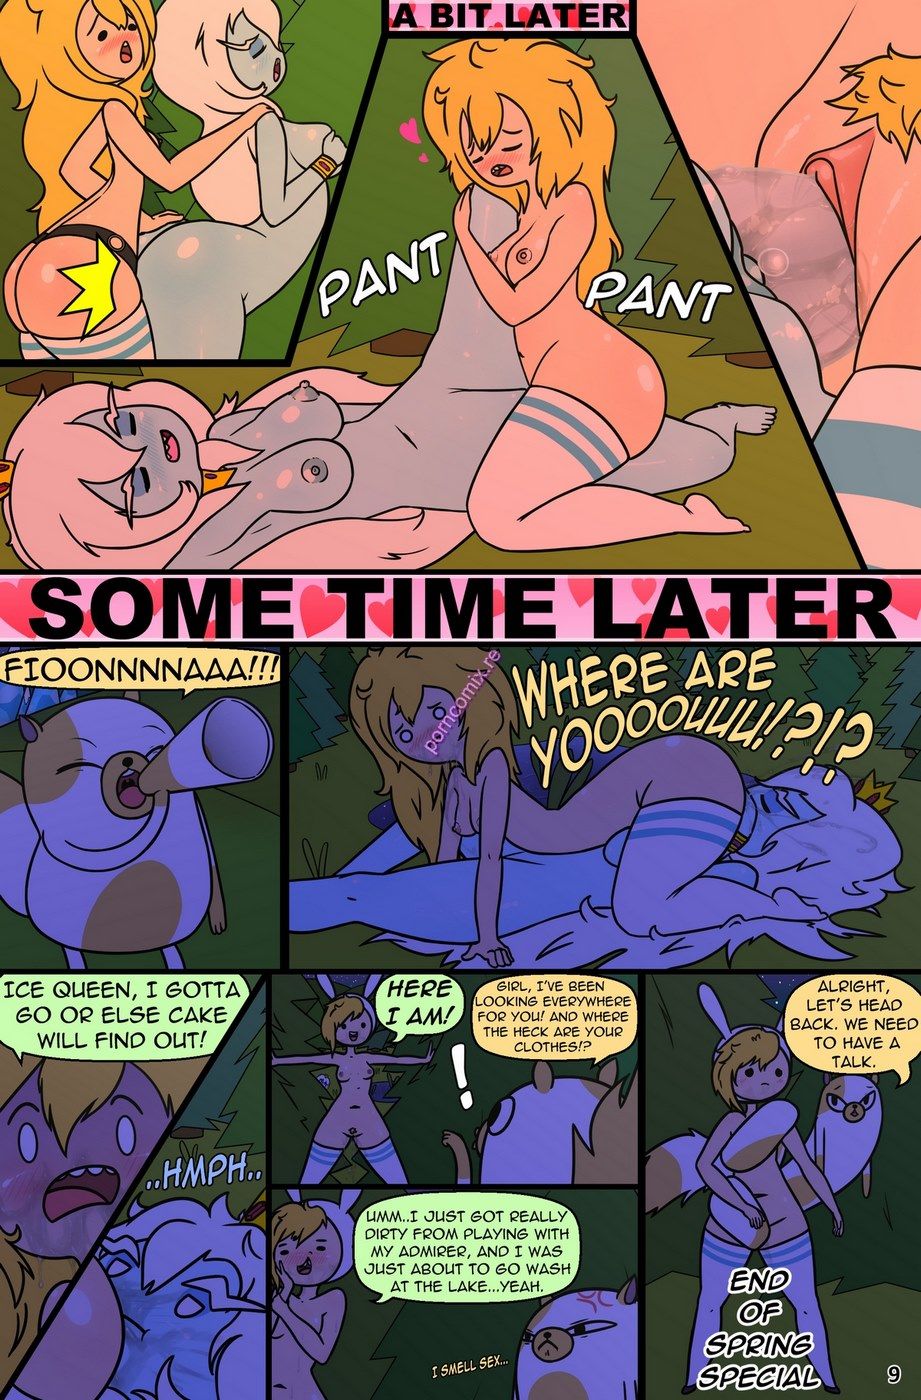 [cubbychambers]_MisAdventure_Time_Spring_Special comix_59817.jpg